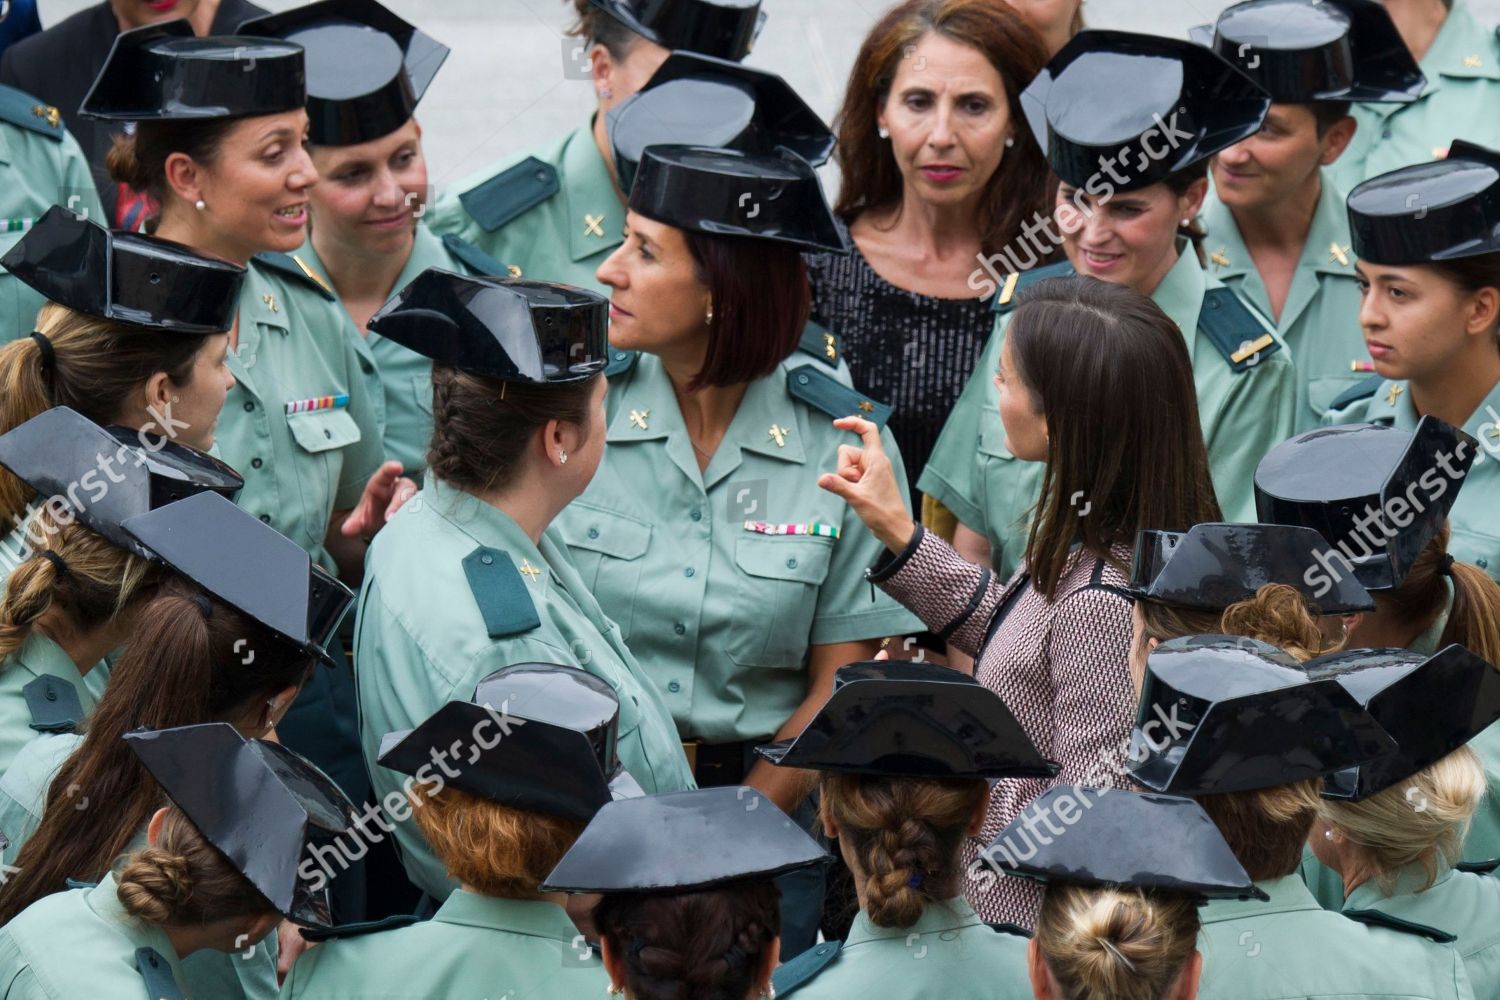 30th-anniversary-of-womens-admission-to-the-civil-guard-corps-madrid-spain-shutterstock-editorial-9896518aj.jpg